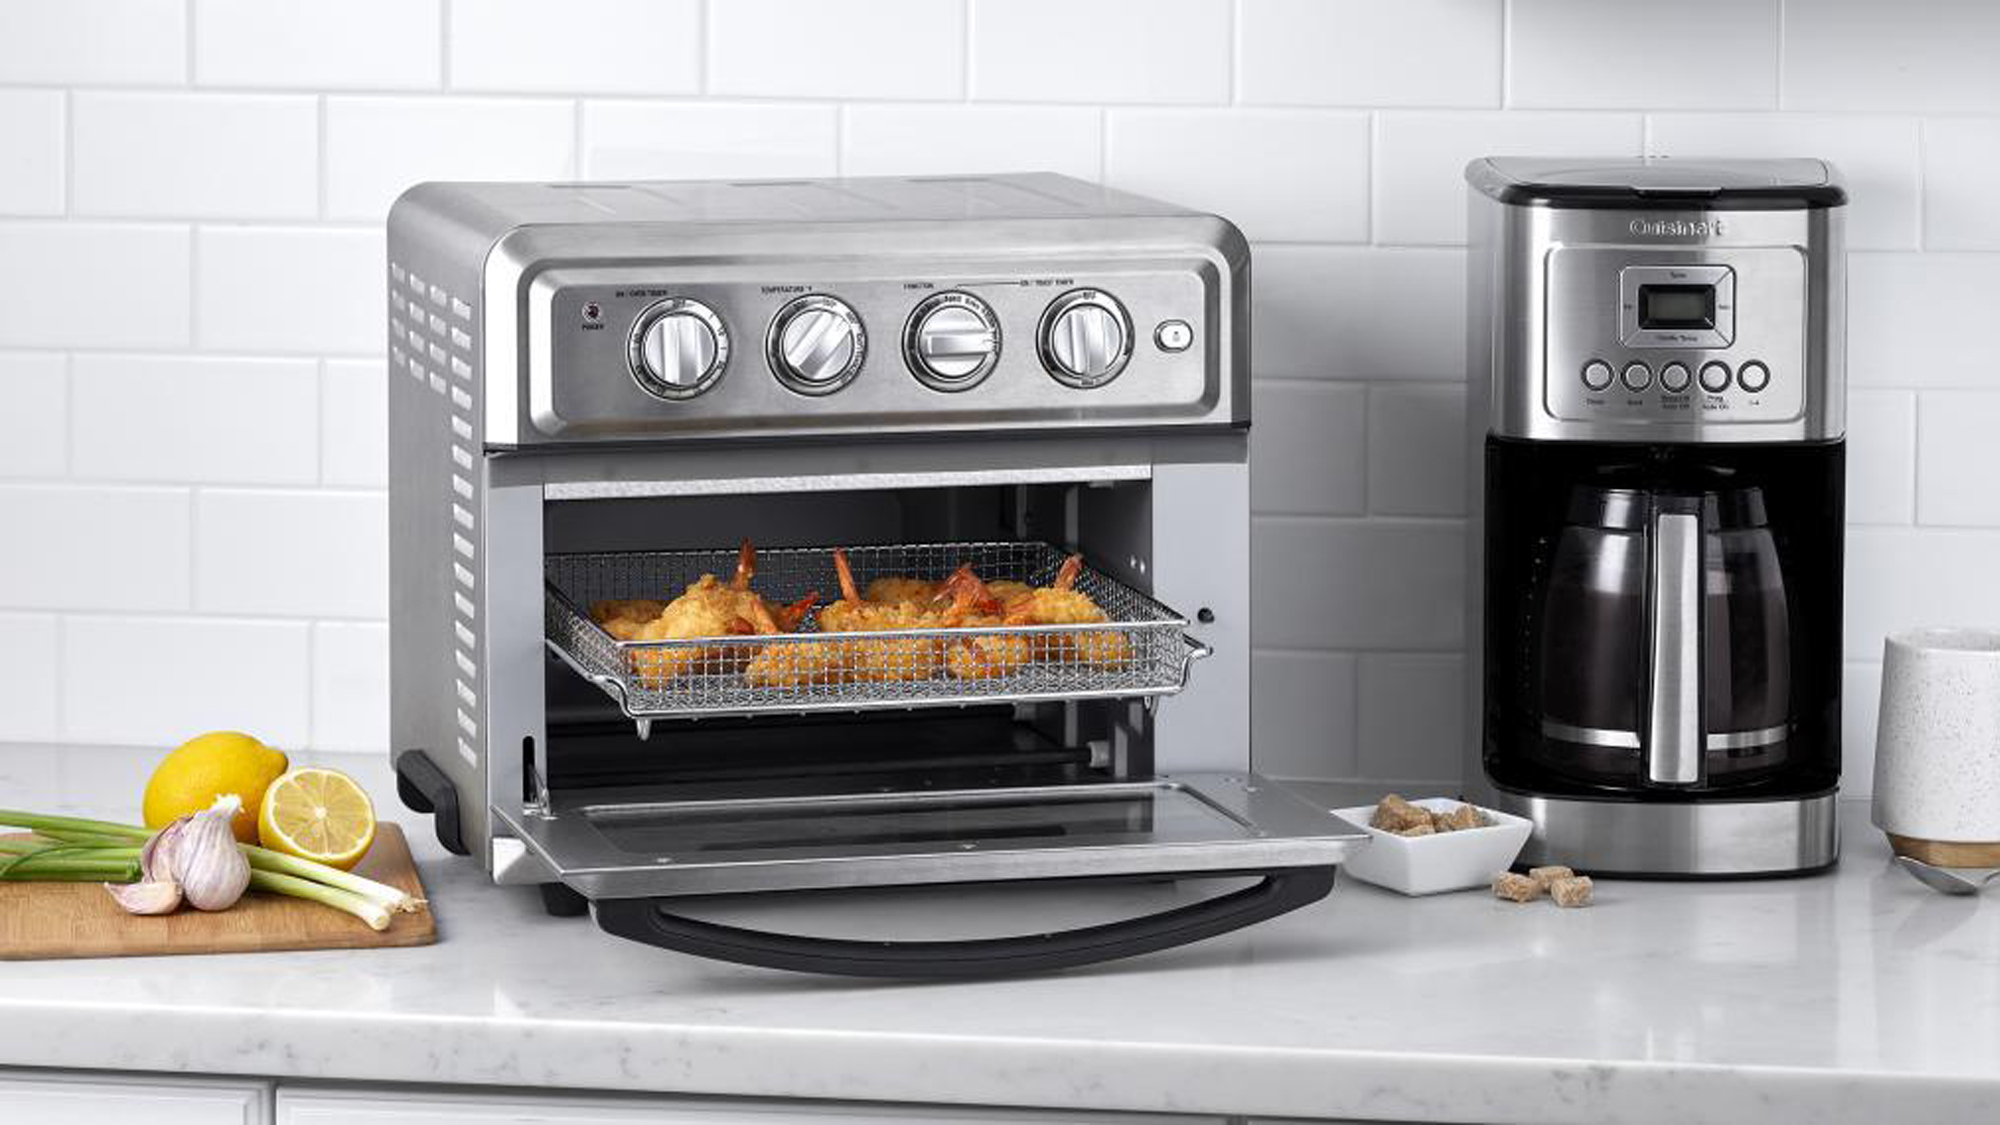 Cuisinart - Air Fryer Toaster Oven with Grill - Stainless Steel